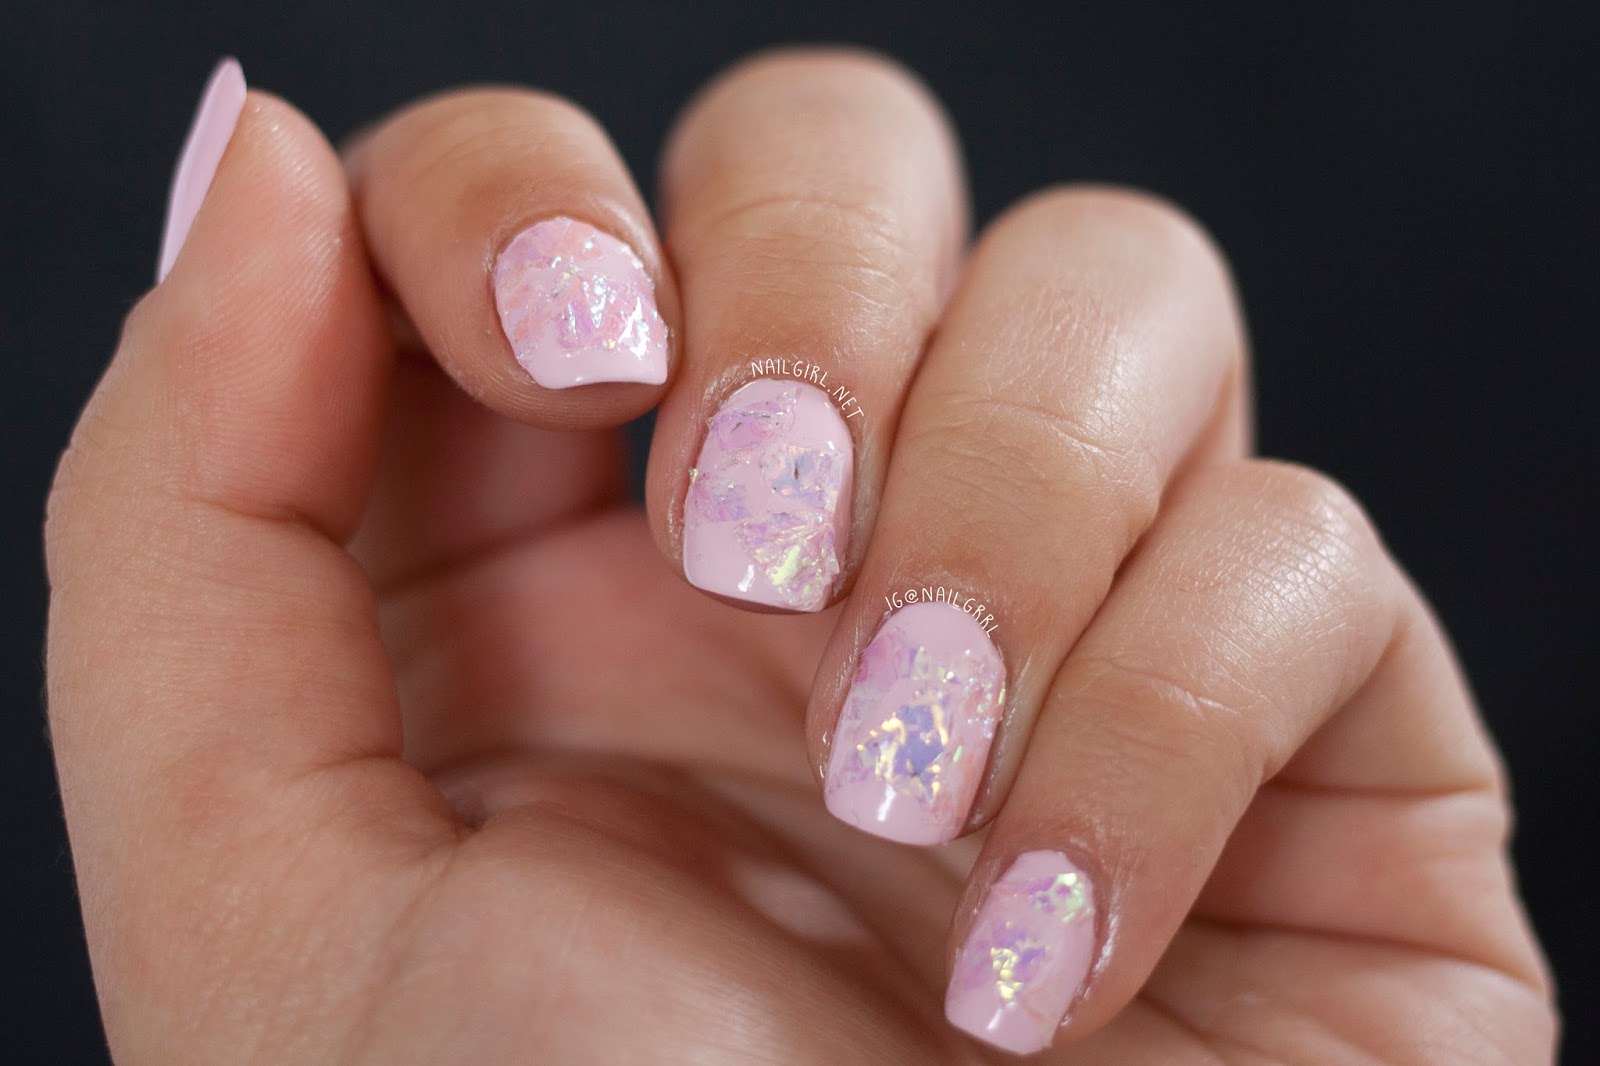 2. 10 Glass Nail Art Designs That Will Make Your Nails Shine - wide 6